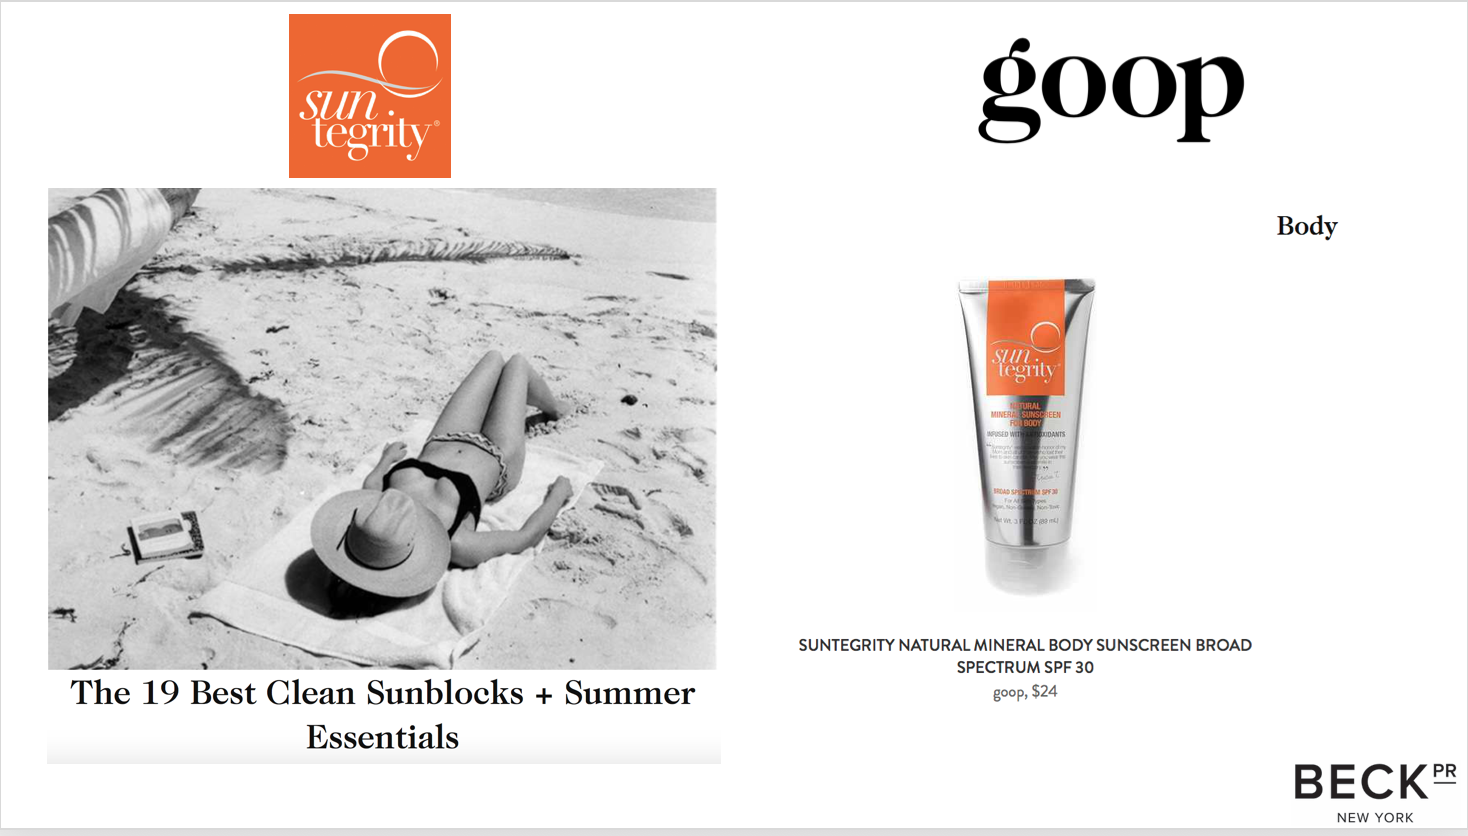 The 19 Best Clean Sunblocks And Summer Essentials - Suntegrity Natural Mineral Body Sunscreen SPF 30